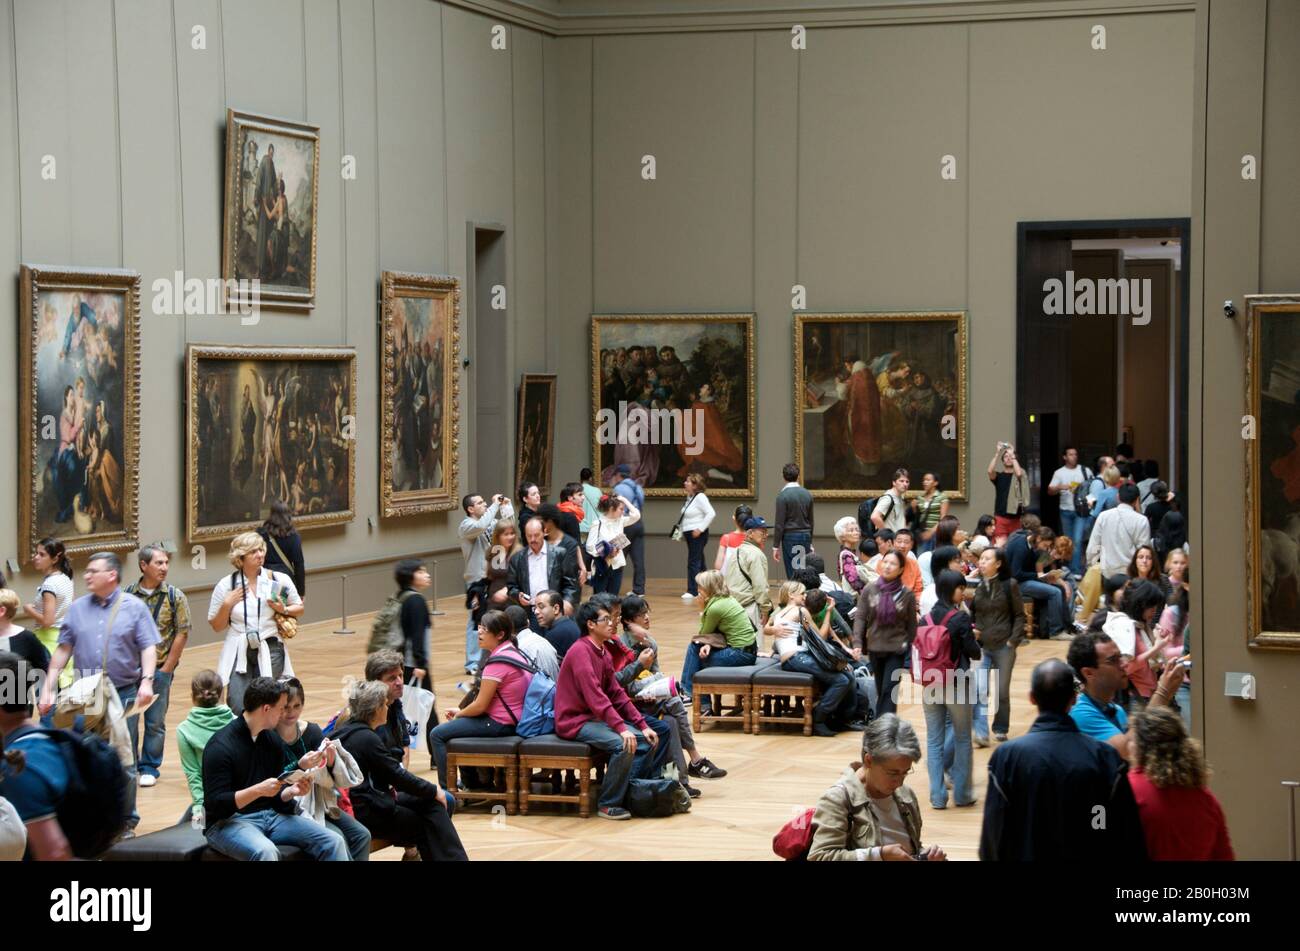 The Louvre, interior with people viewing the paintings, Paris, Ile de France, France Stock Photo